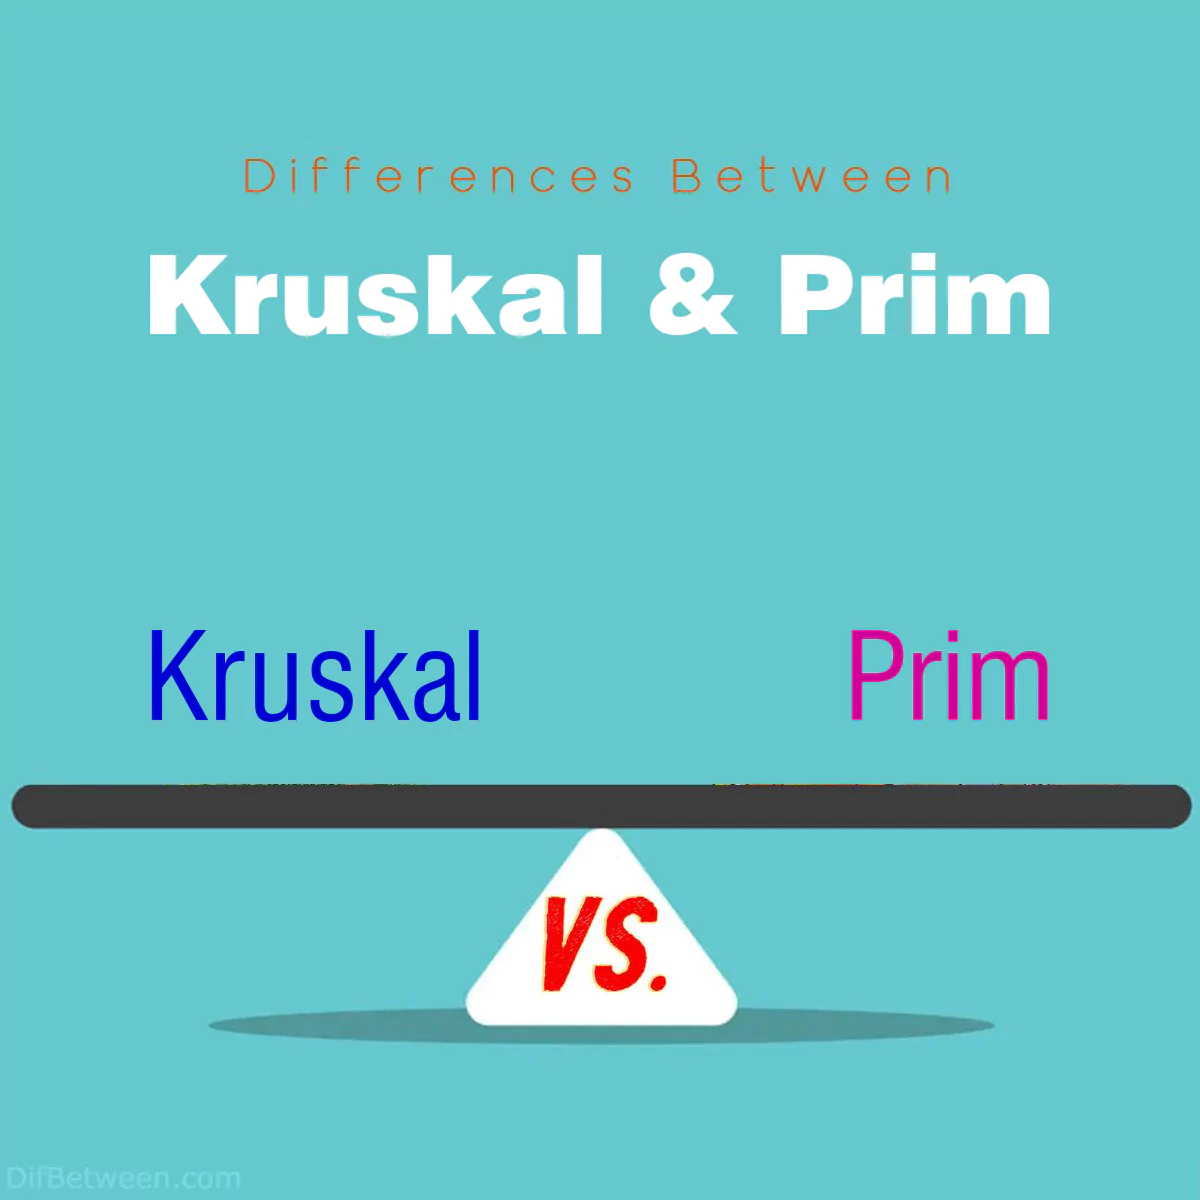 Differences Between Kruskal and Prim